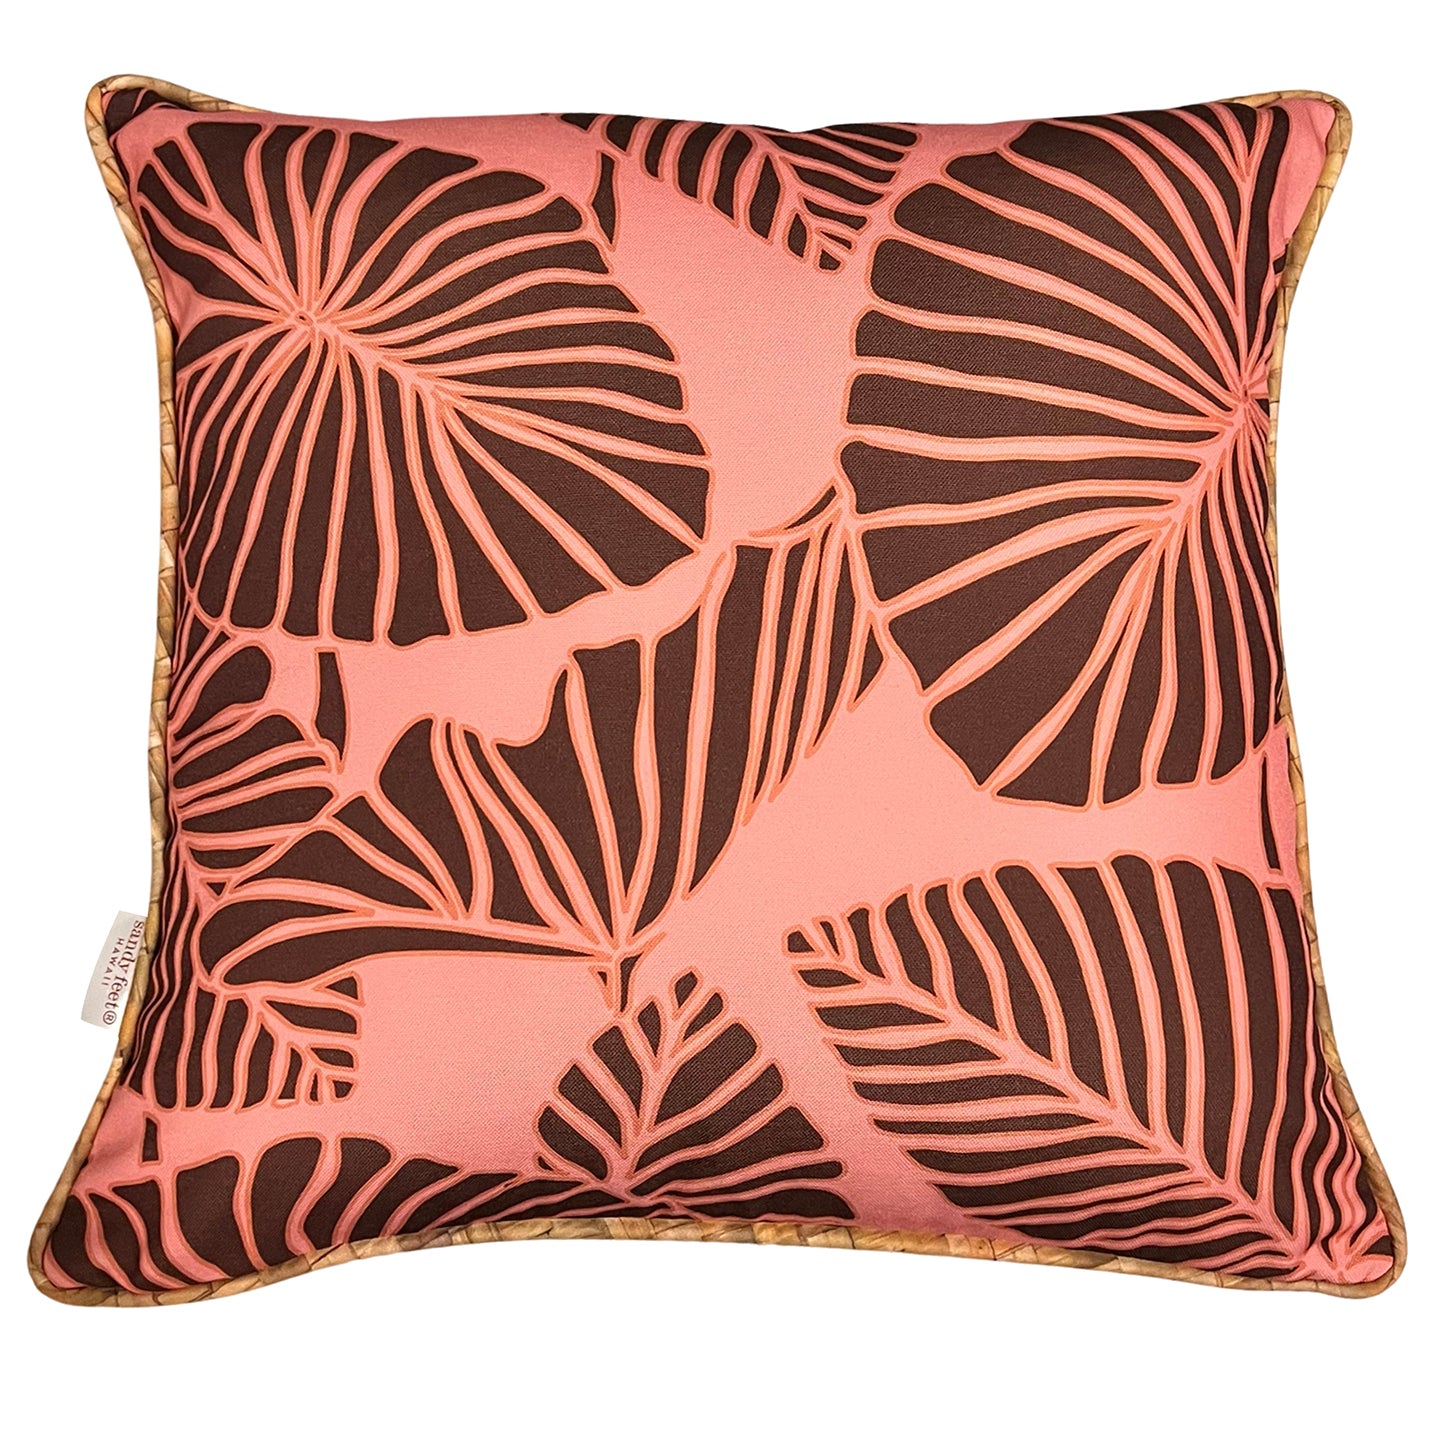 Kalo Pink and Brown Pillow Cover